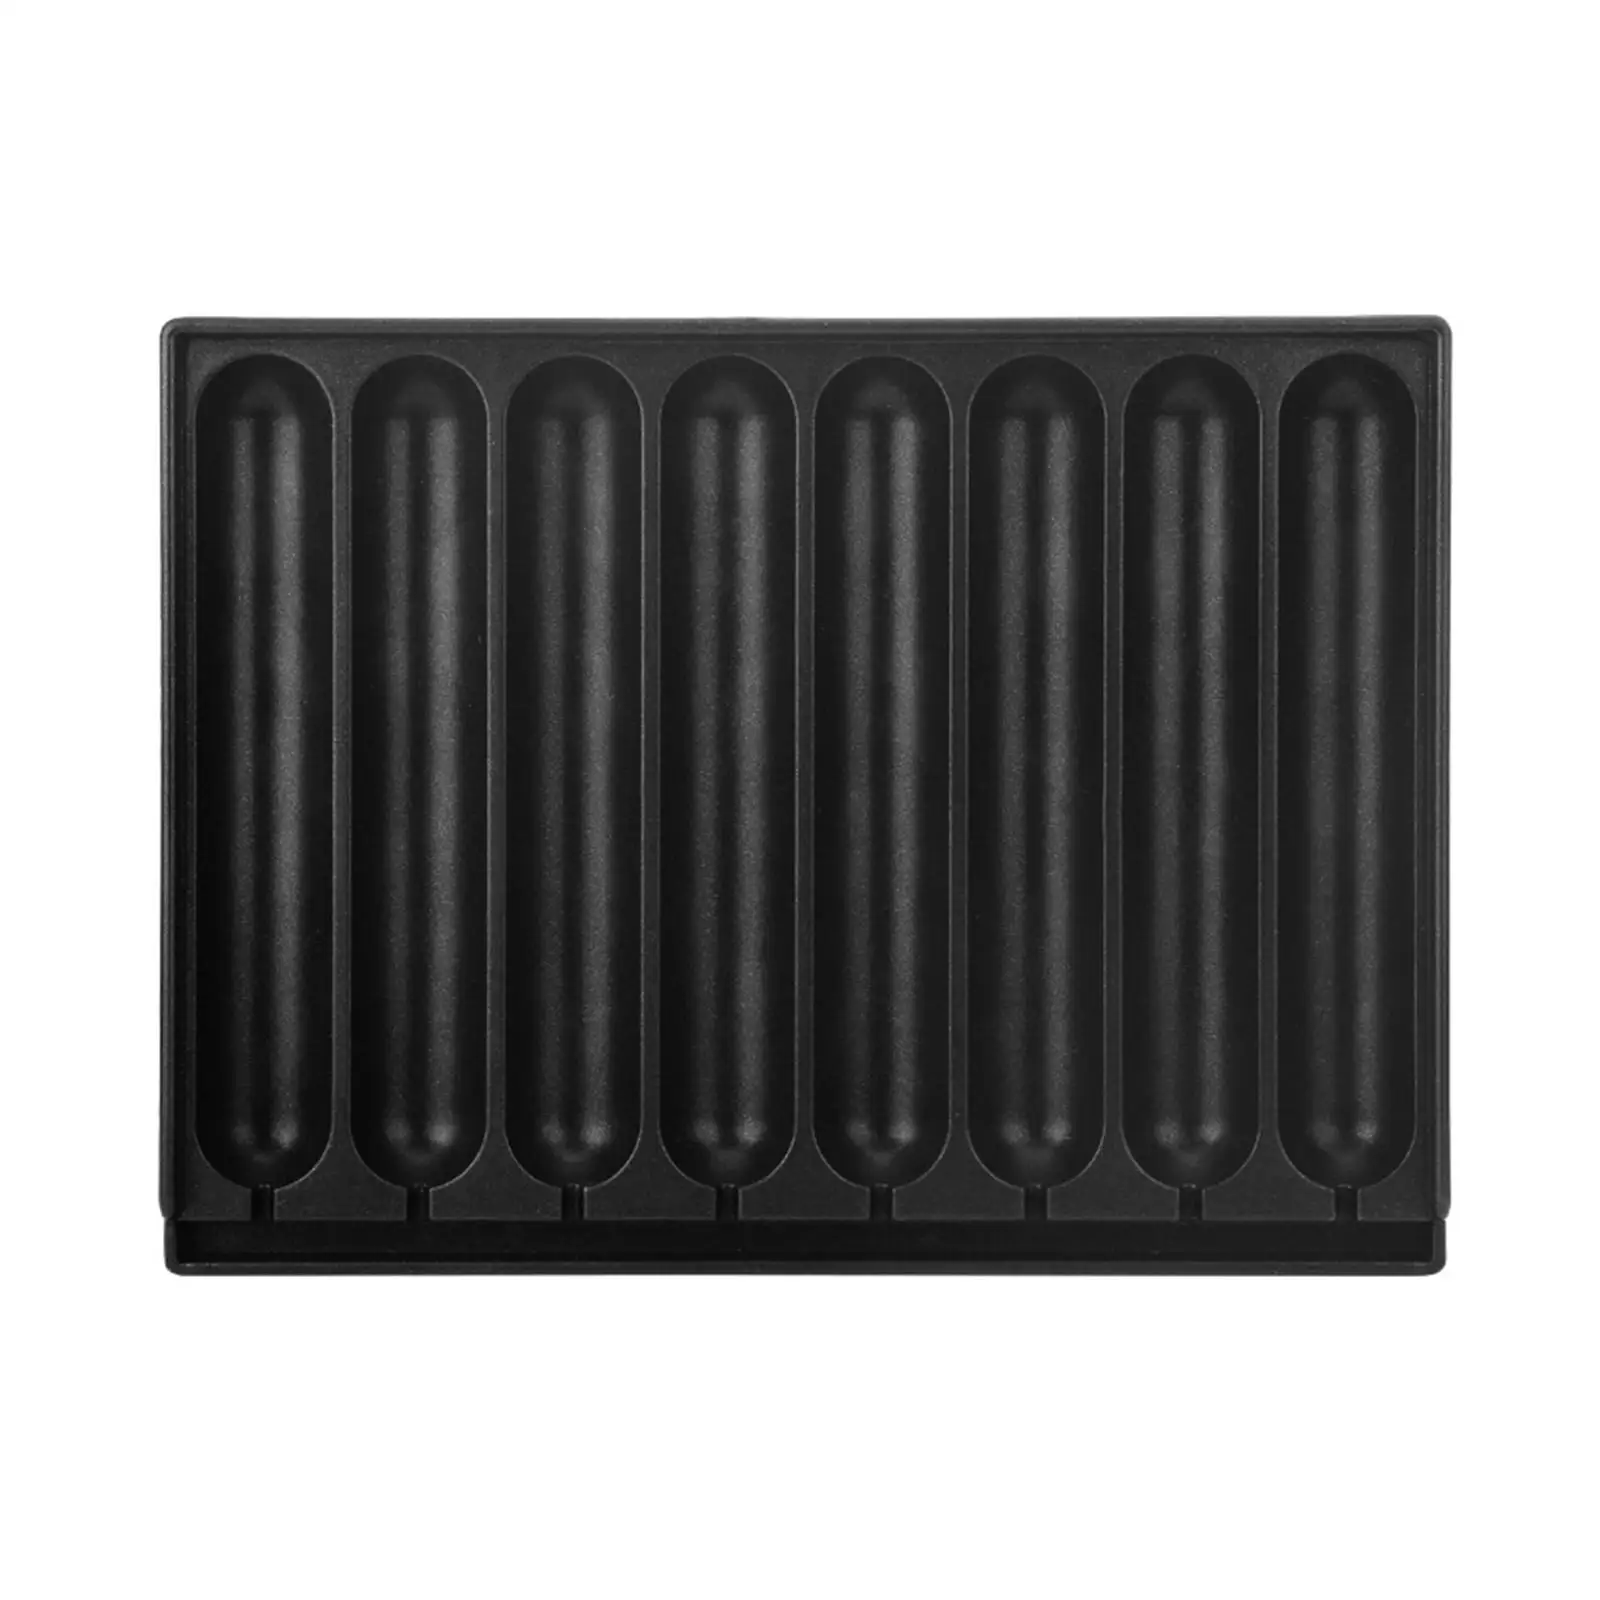 8 Grids Sausage Grilling Pan Nonstick Corn for Baking Breakfast